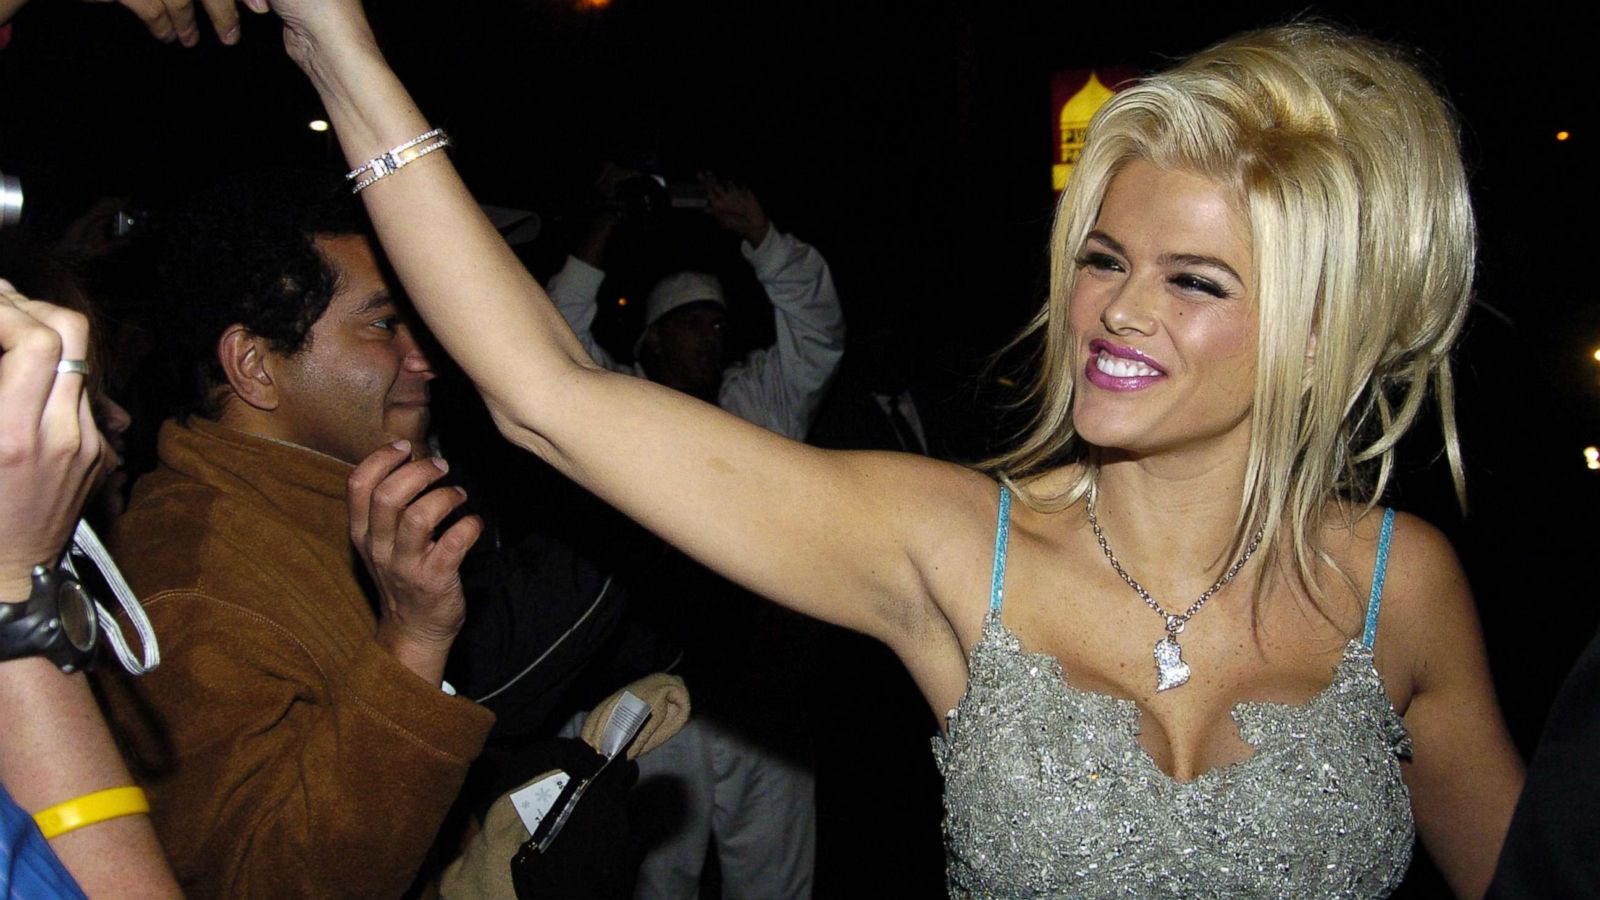 daryl ingram recommends anna nicole smith scene pic